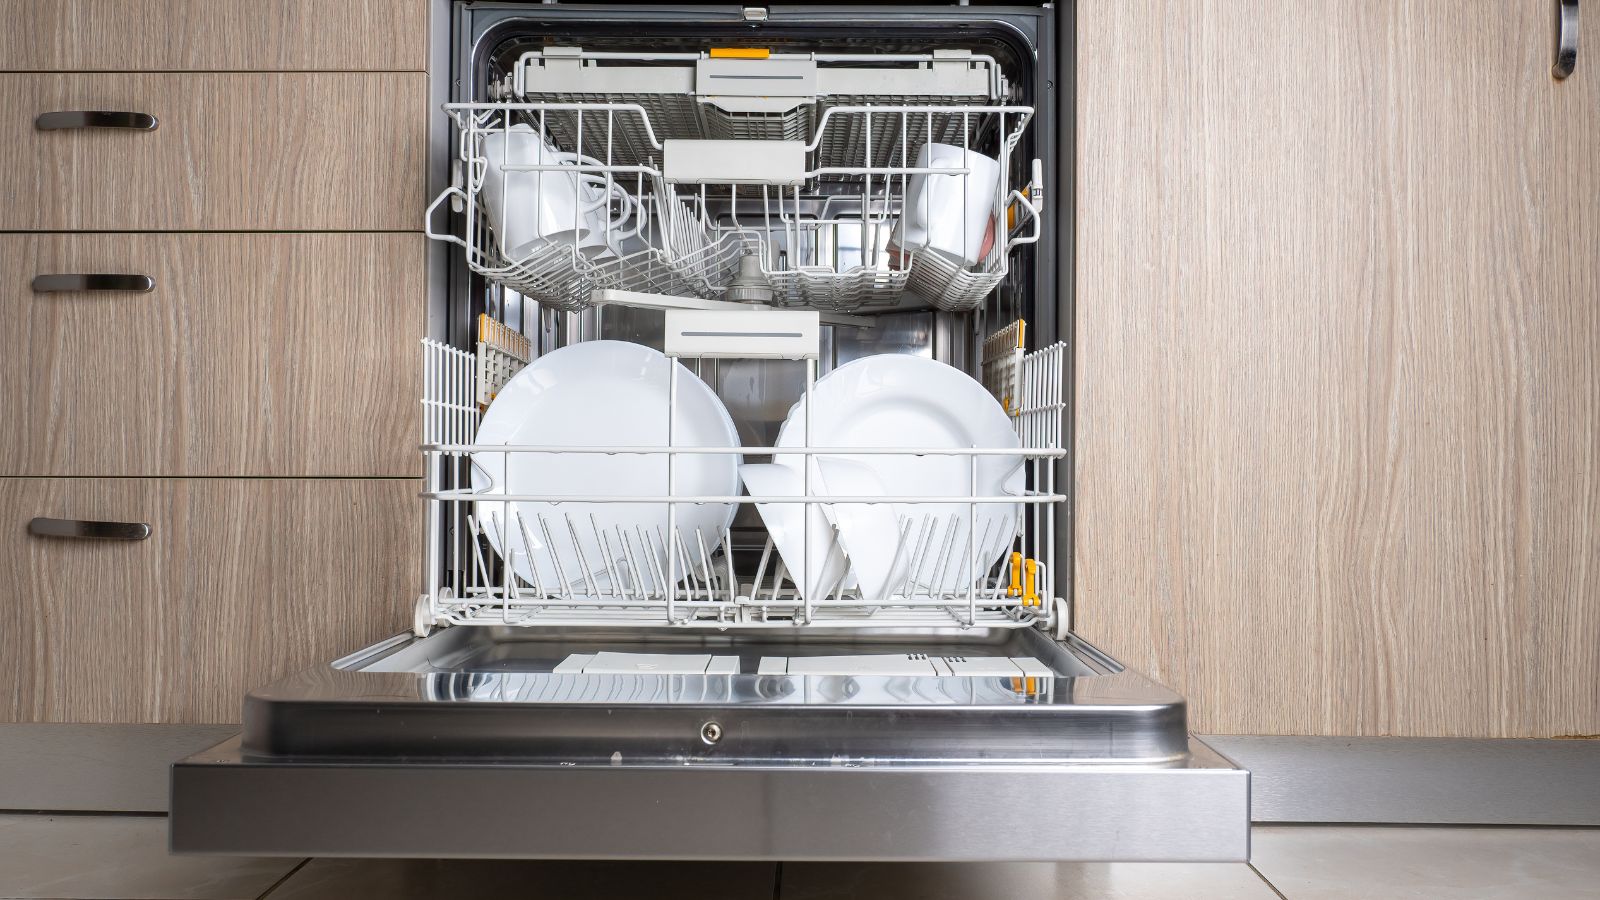 How To Fix The Error Code 4-3 For Maytag Dishwasher